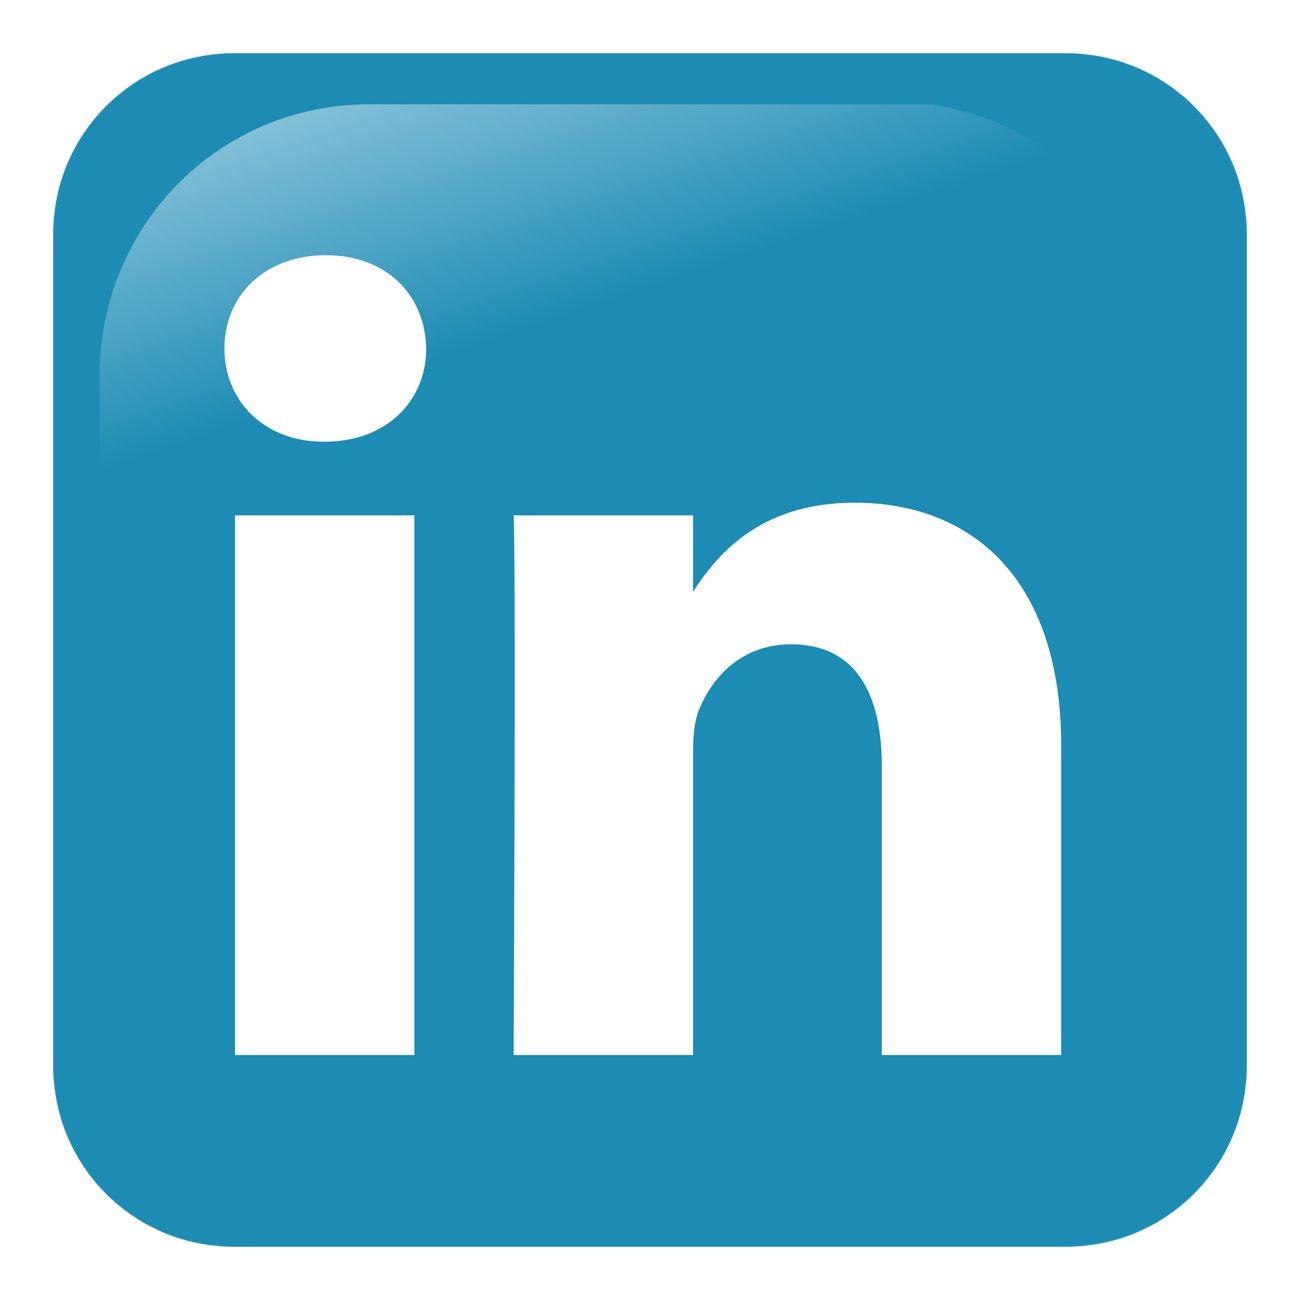 Inkedin Logo - LinkedIn Logo, LinkedIn Symbol Meaning, History and Evolution